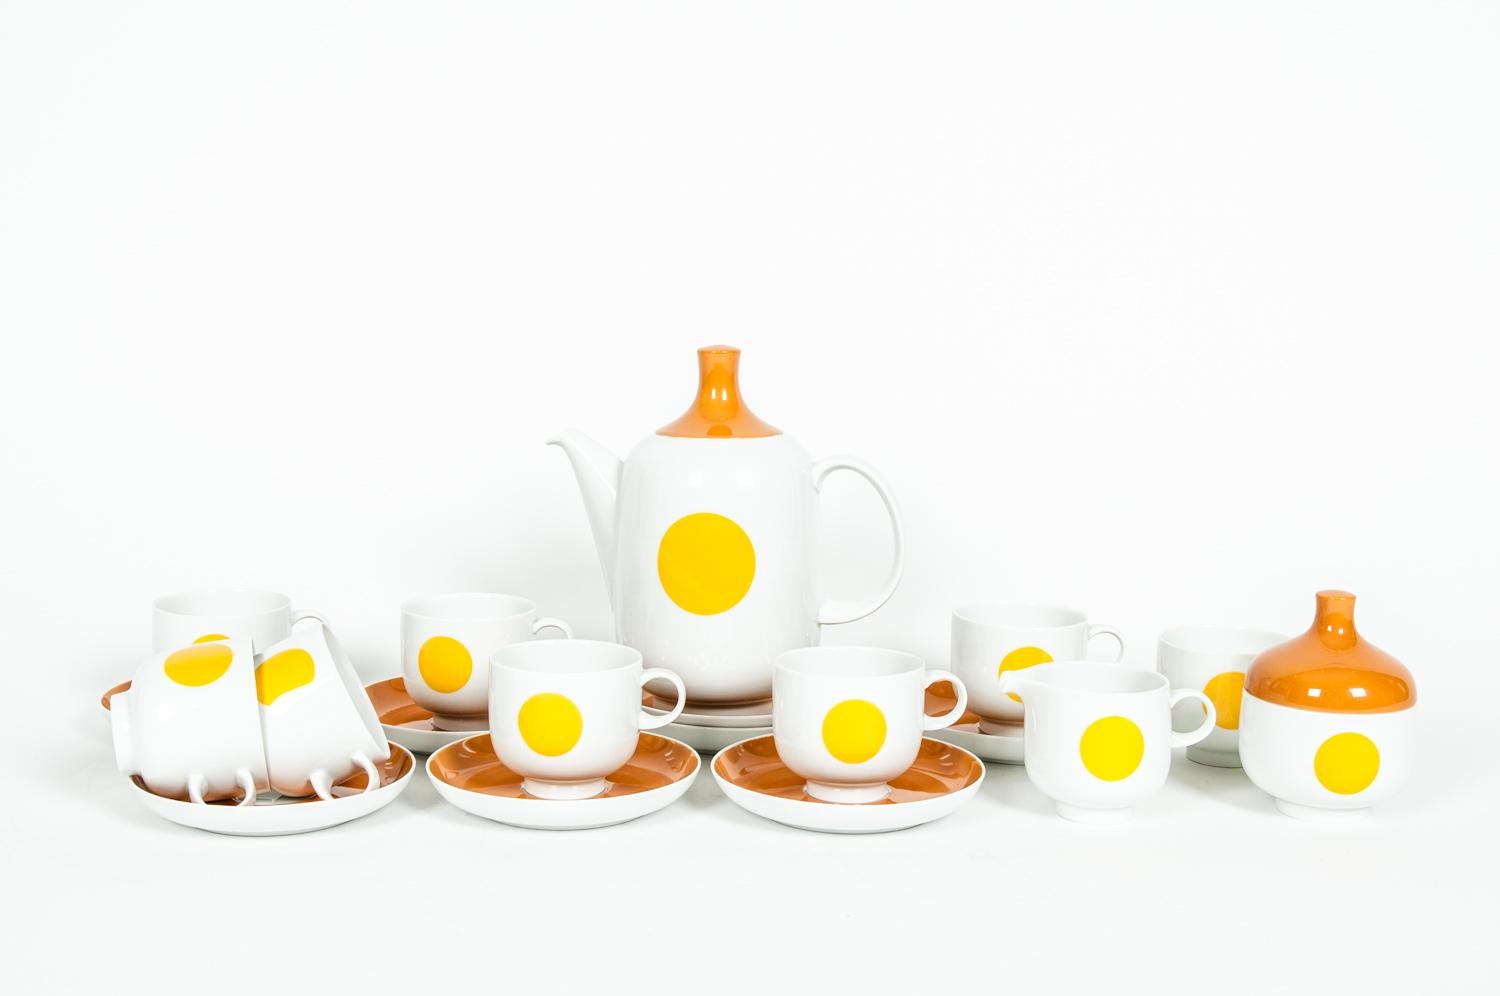 Mid-Century modern German porcelain tea / coffee service for eight people. Each piece is in excellent condition, maker's mark undersigned. The tea / coffee pot is about 8.5 inches x 8 inches diameter. Sugar bowl is 4.5 inches x 4 inches. Creamer is